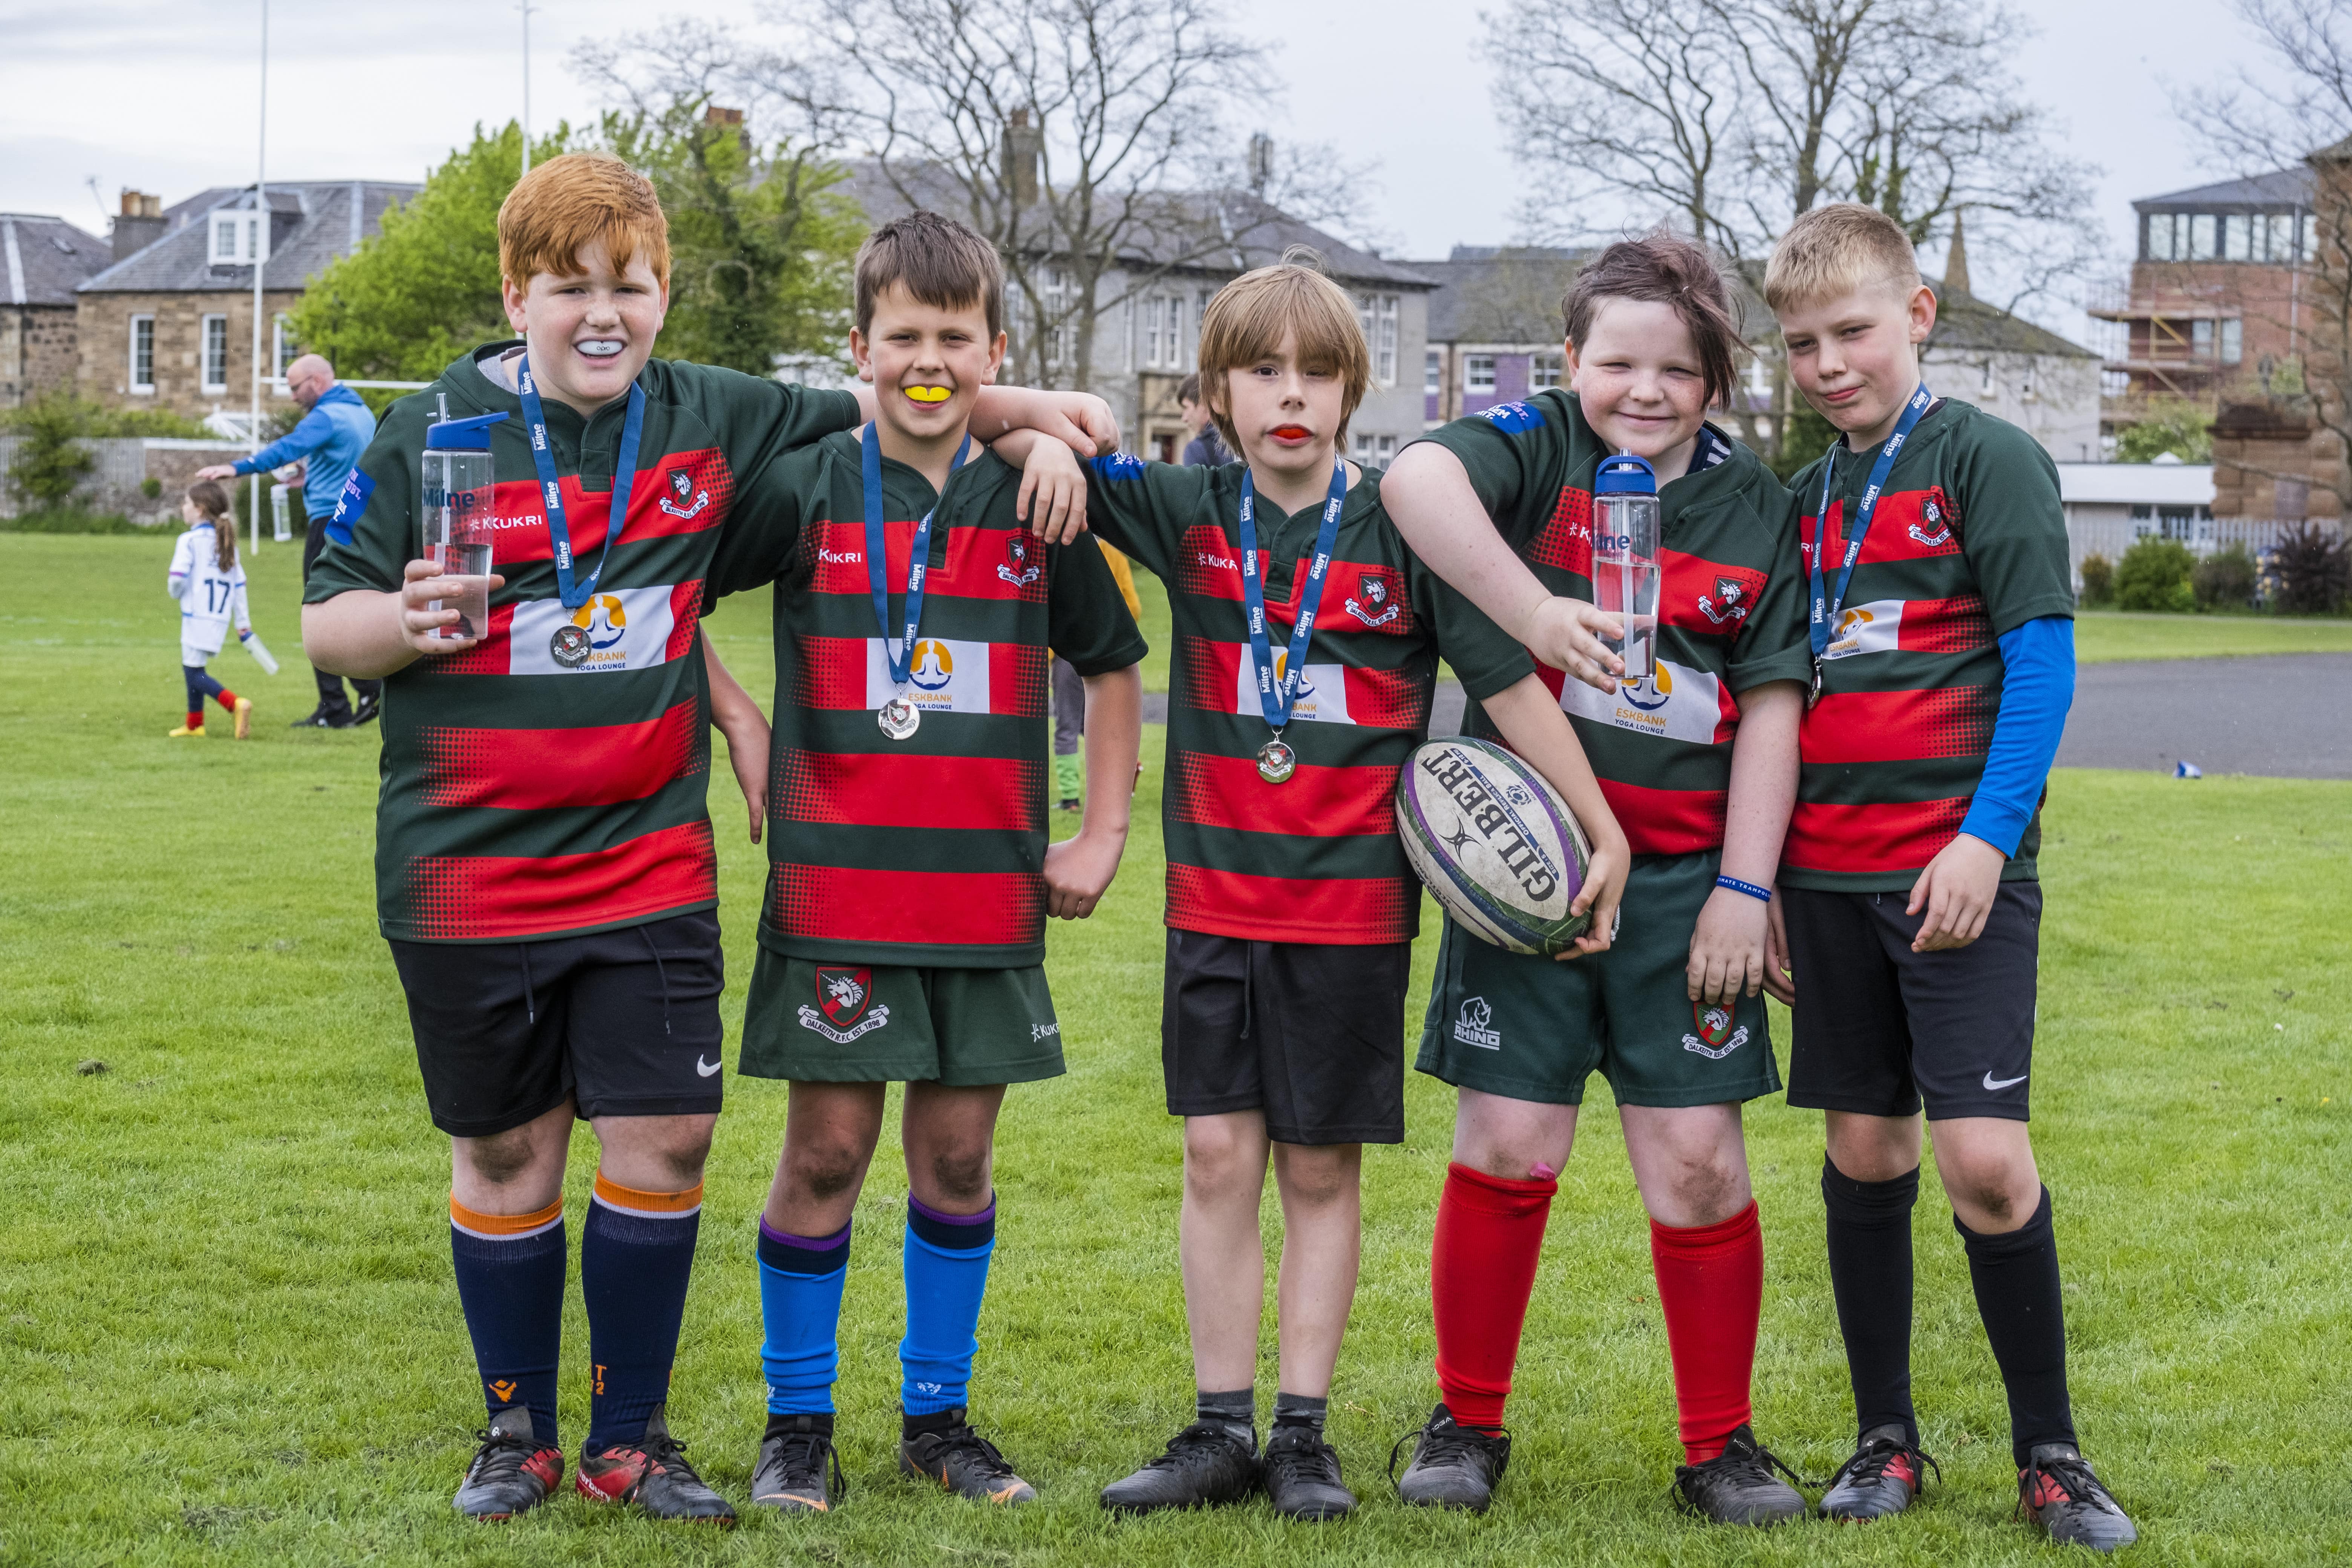 Dalkeith Rugby Club hails successful Minis Festival with support from Stewart Milne Homes